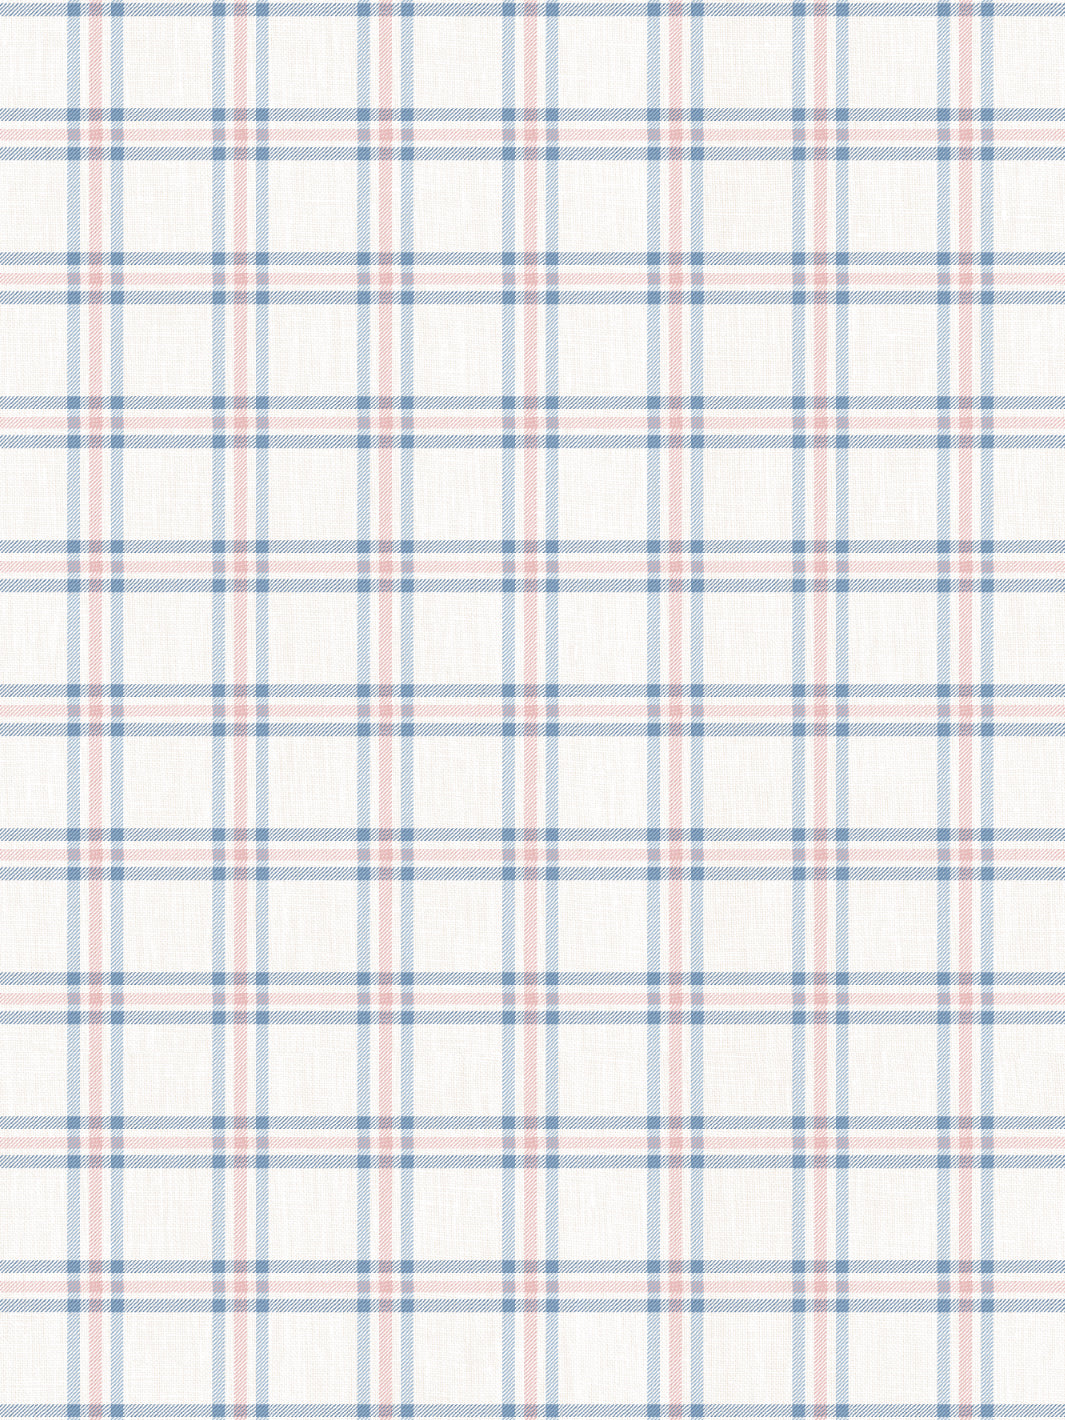 'Rogers Plaid' Linen Fabric by Nathan Turner - Blue Pink